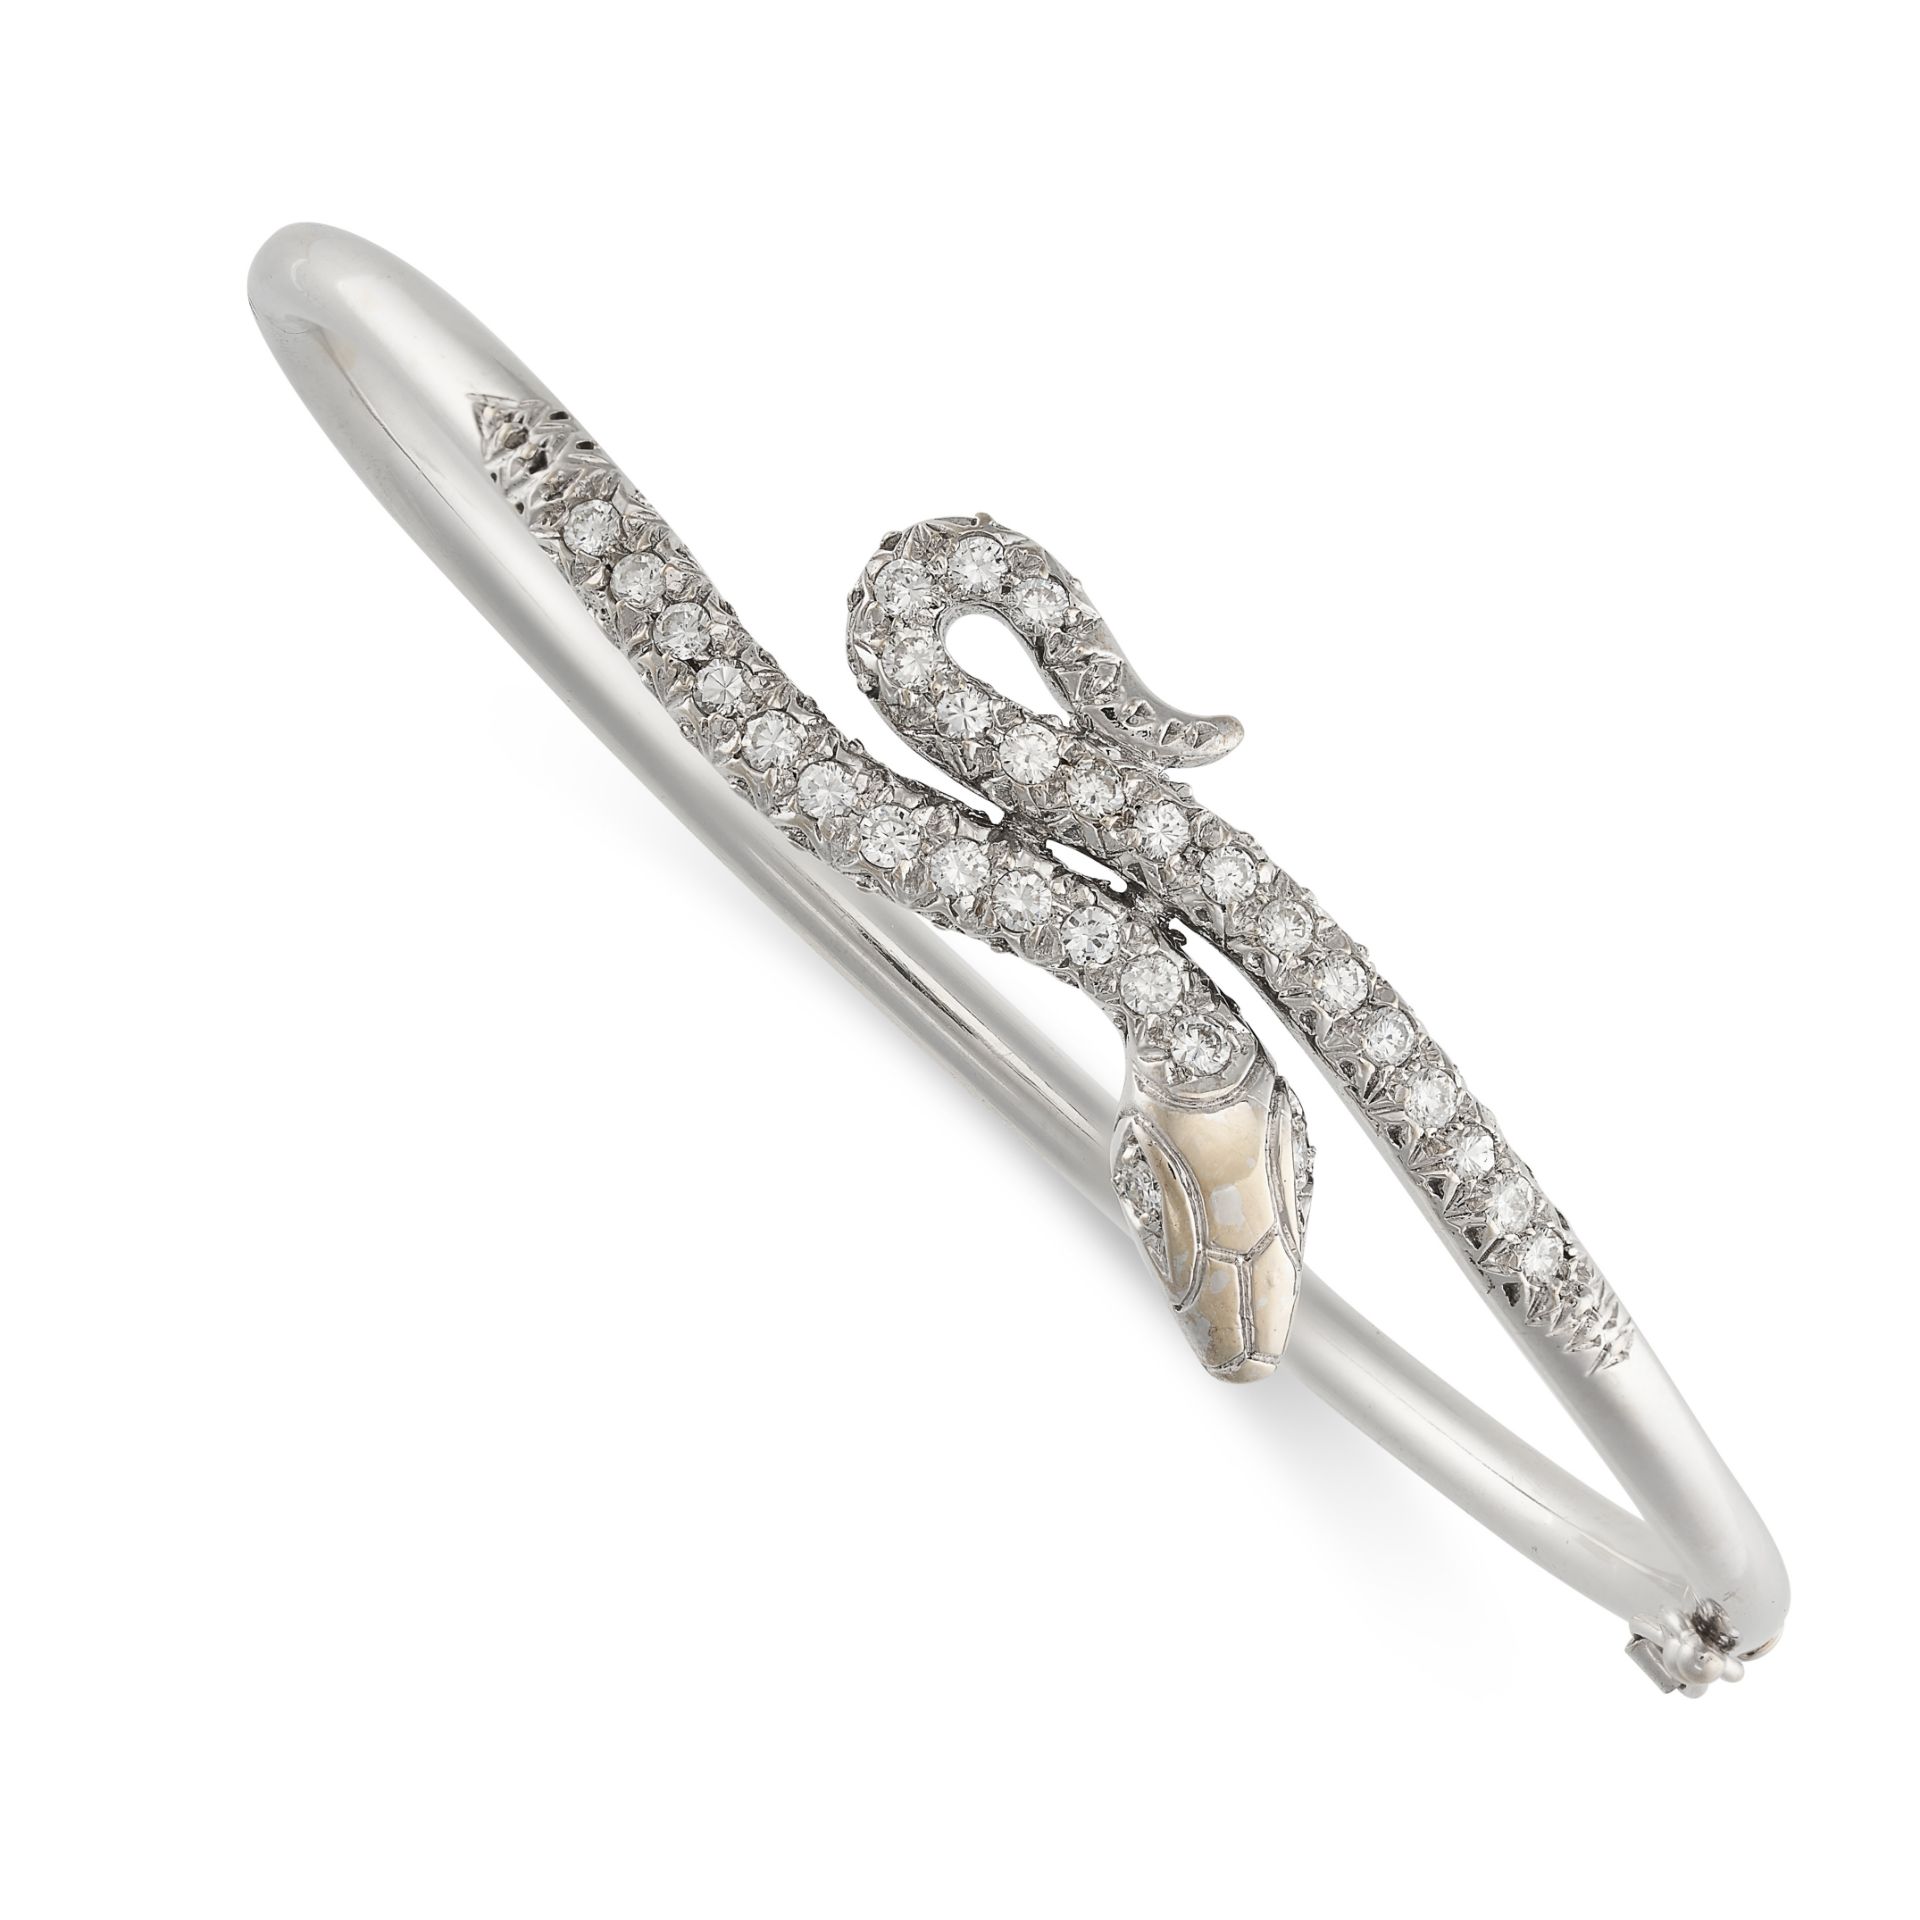 A DIAMOND SNAKE BANGLE designed as a coiled snake, set with round brilliant cut diamonds, stamped